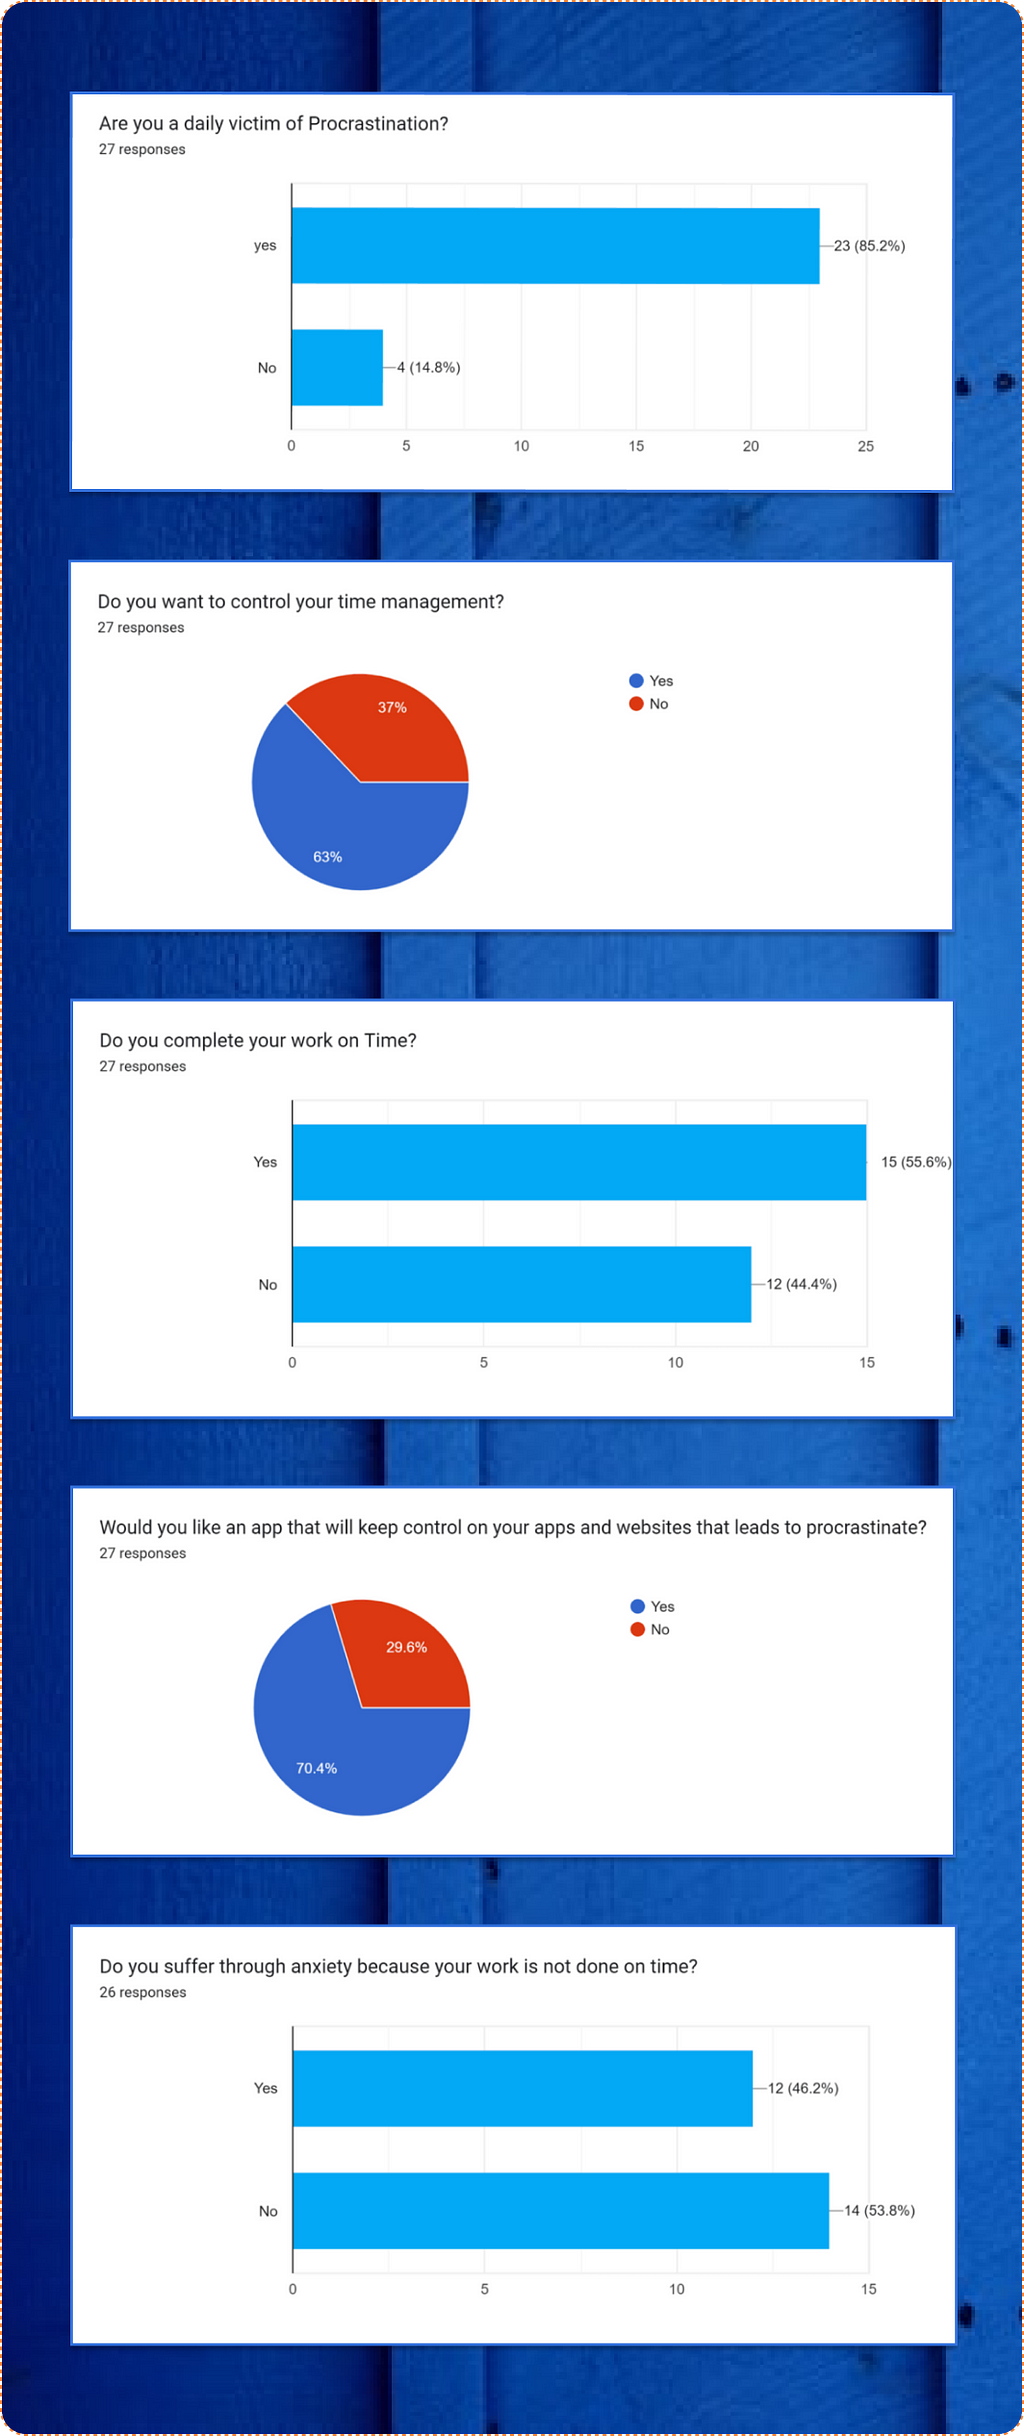 These are the images from the result of an online user survey.